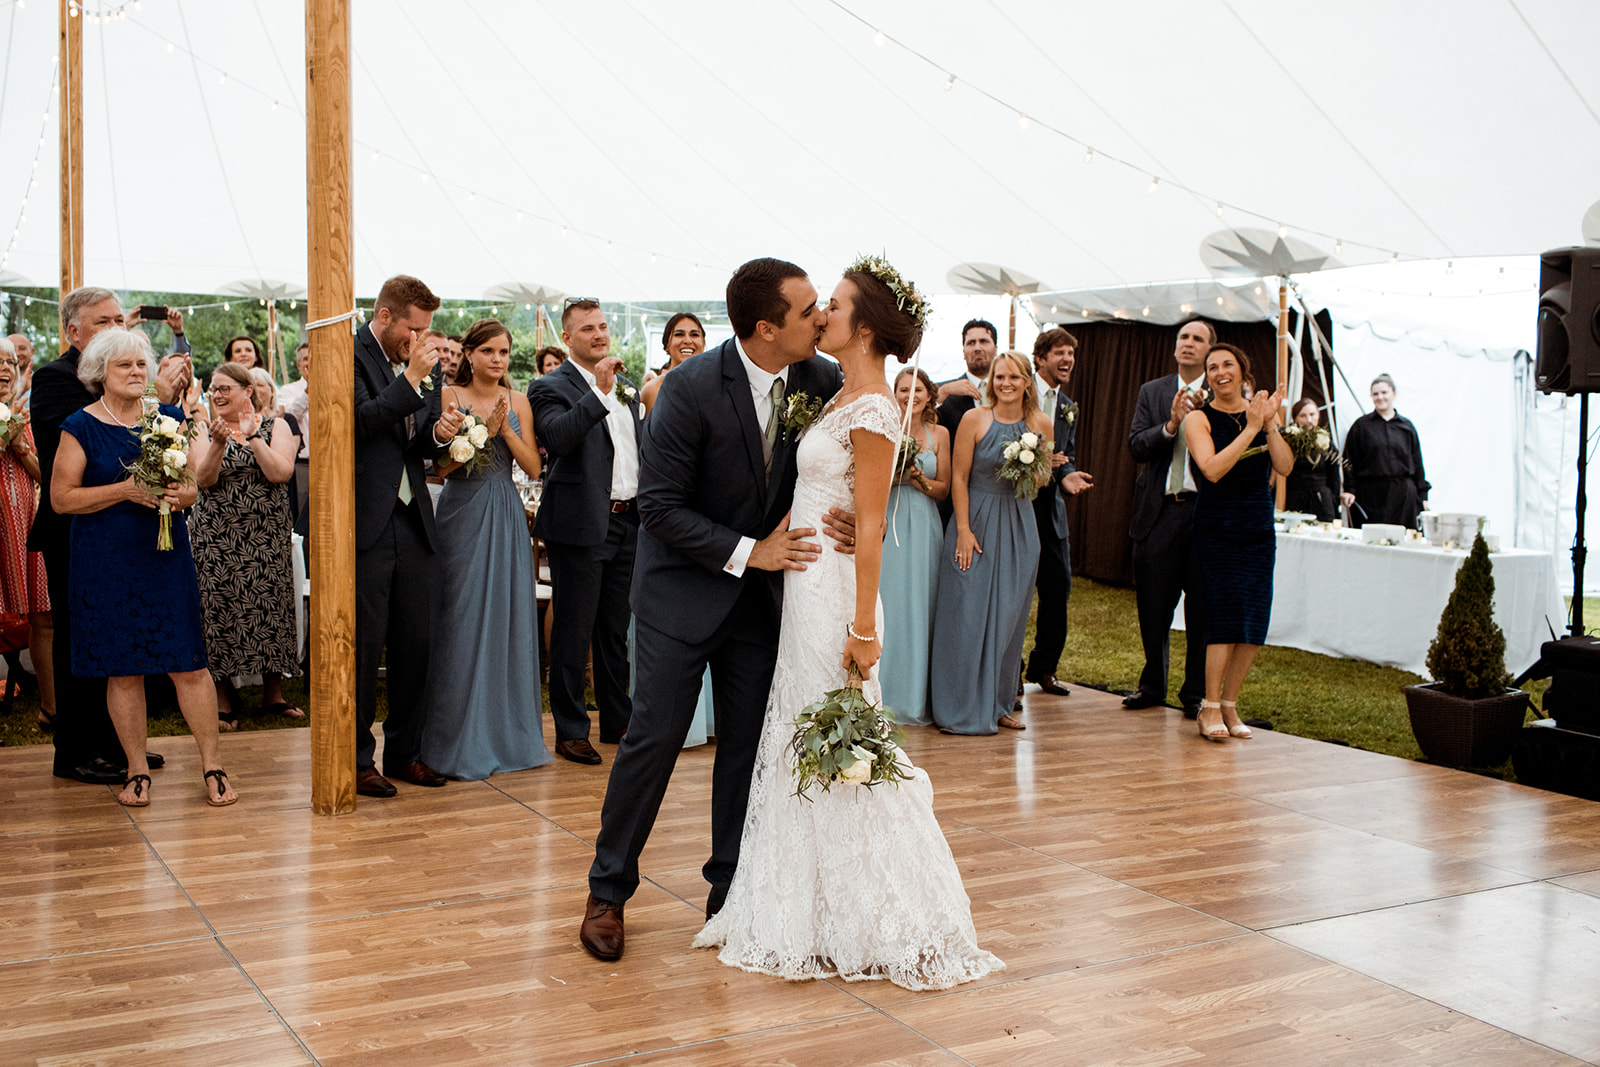 Outdoor sperry tented wedding with a wooden dance floor. - Pearl Weddings & Events